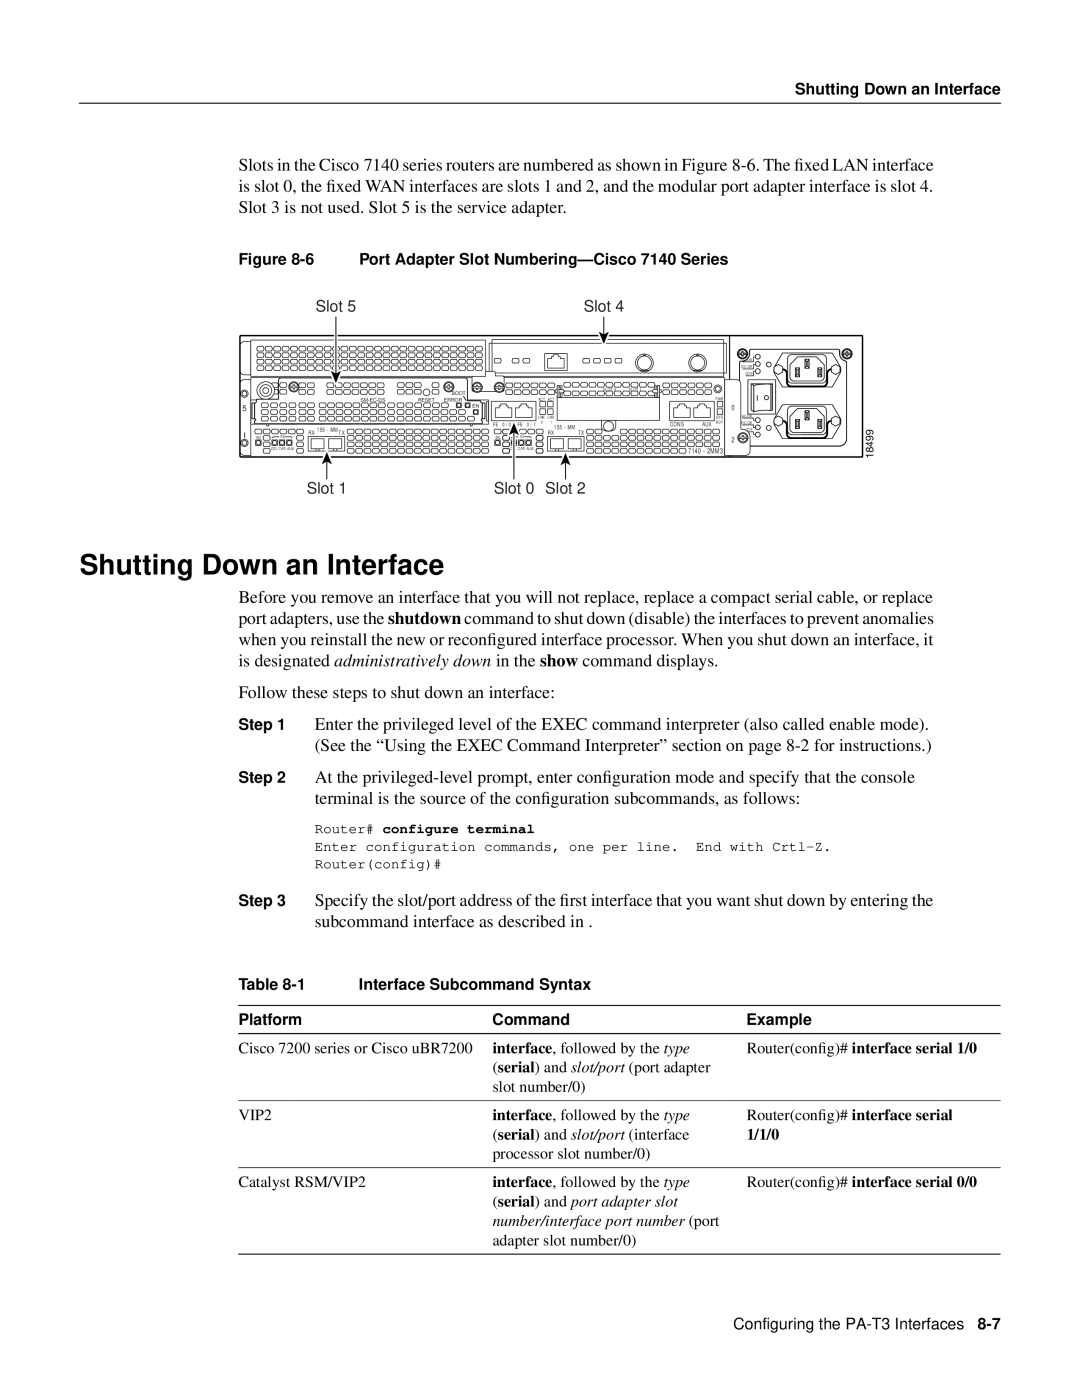 Cisco Systems PA-T3 manual Shutting Down an Interface 